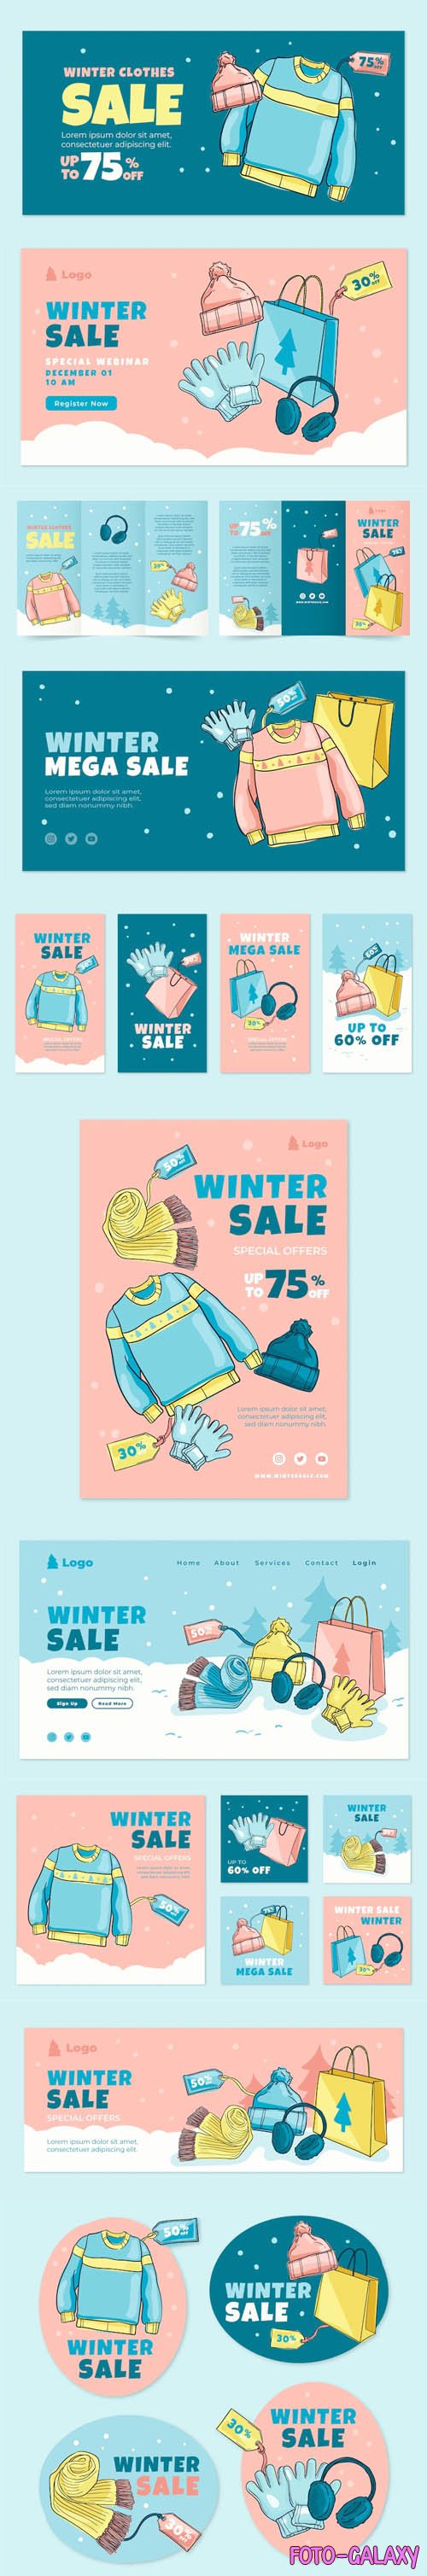 Hand Drawn Winter Sale Marketing Vector Templates Pack